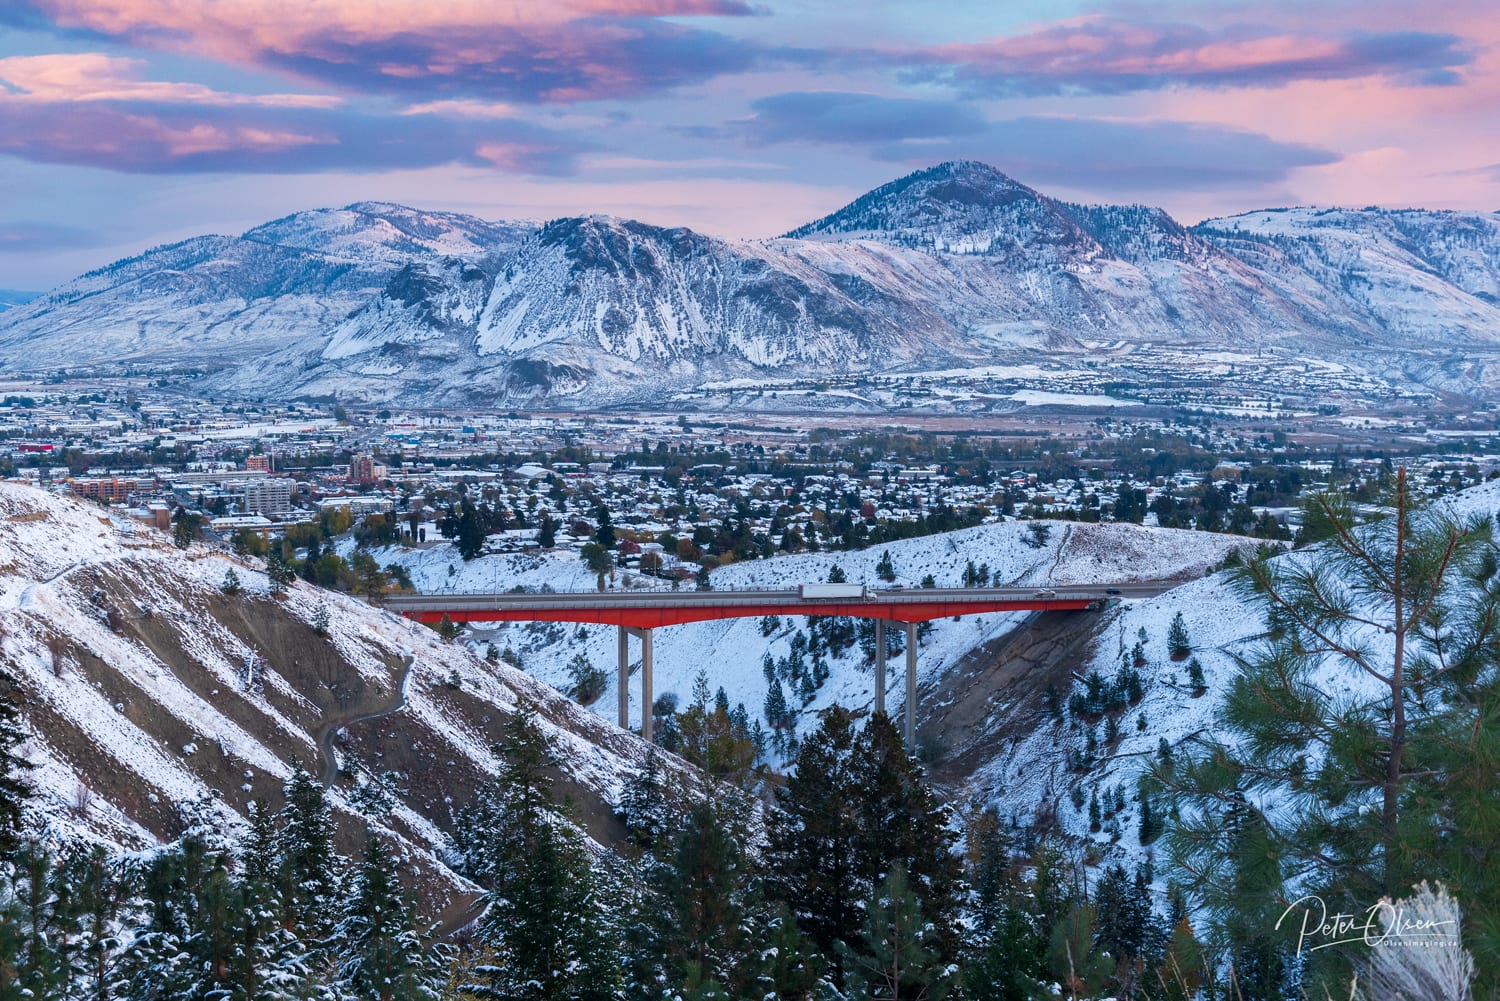 snowy mountain view with bright red train tracks to the city with pink and purple sky